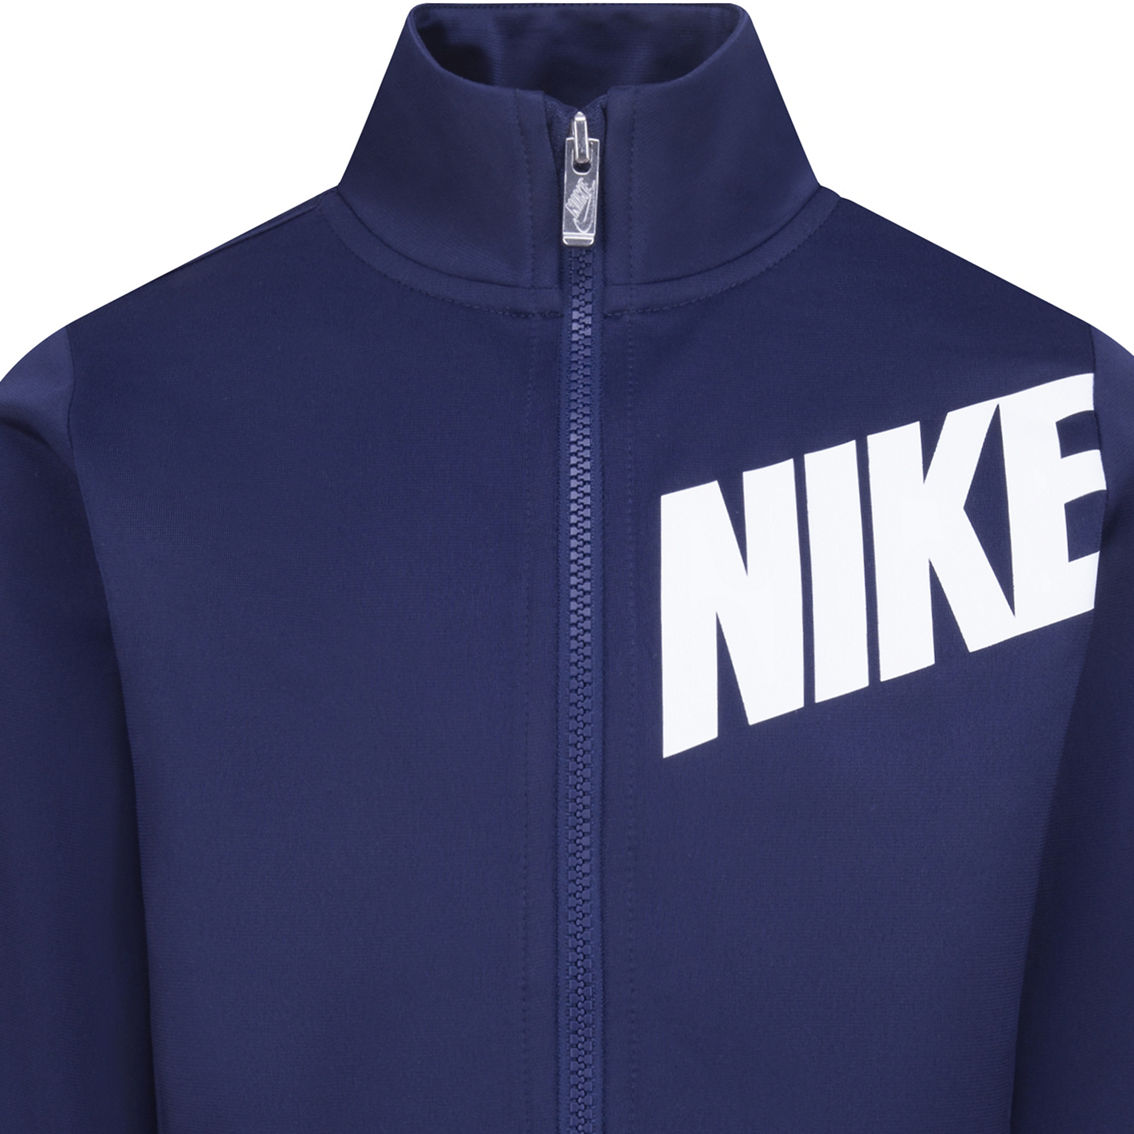 Nike Little Boys Tricot 3 Pc. Set | Boys 4-7x | Clothing & Accessories ...